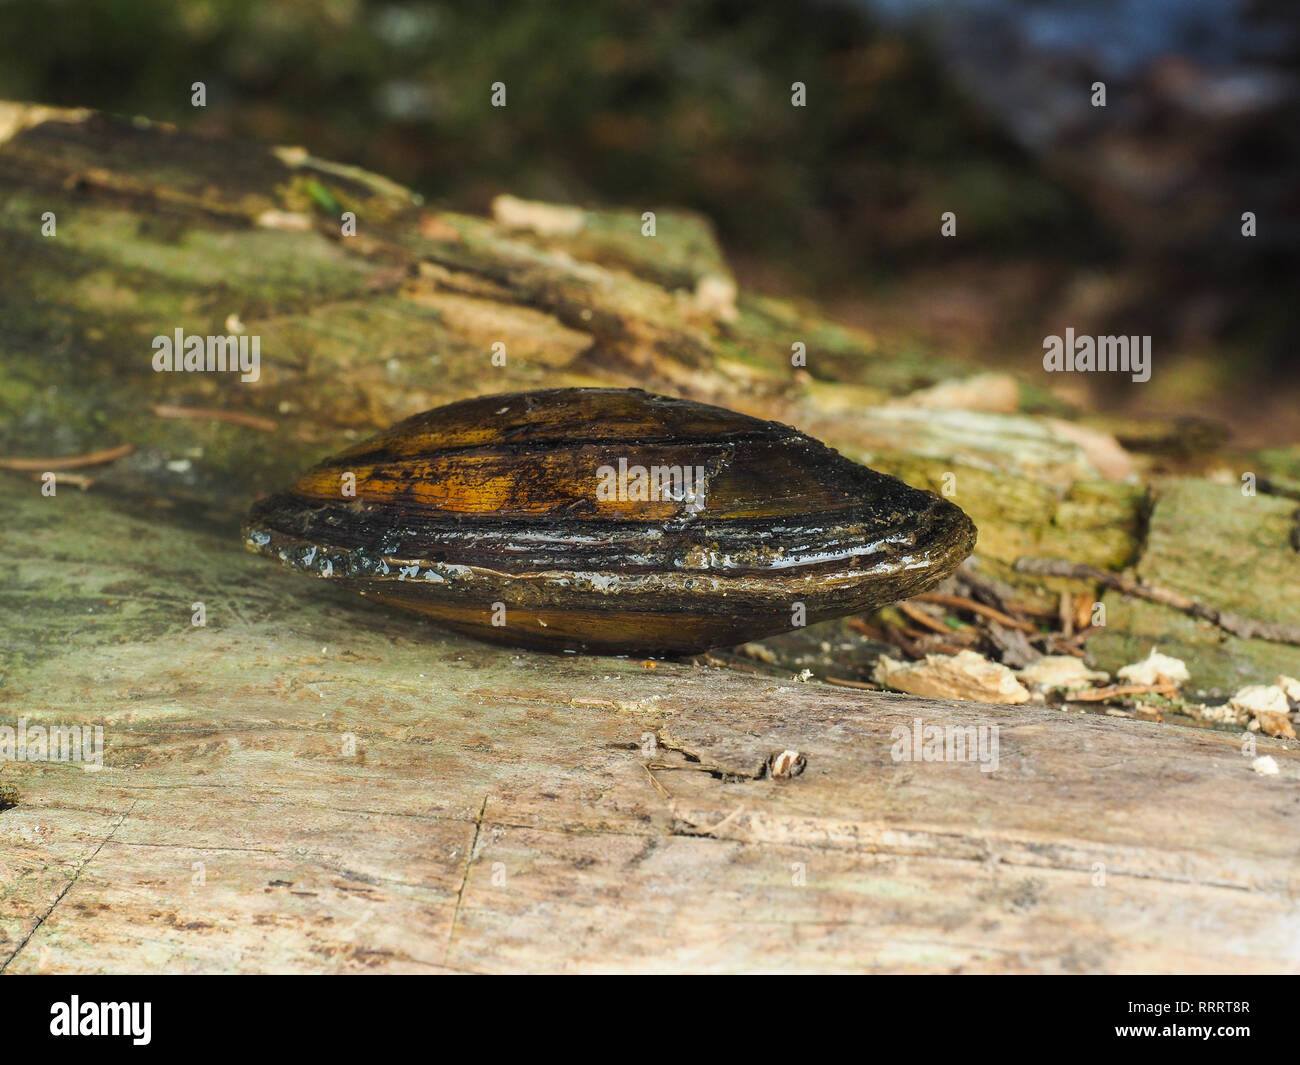 Closeup of a fresh water swan mussel, Anodonta cygnea, on a wooden log Stock Photo